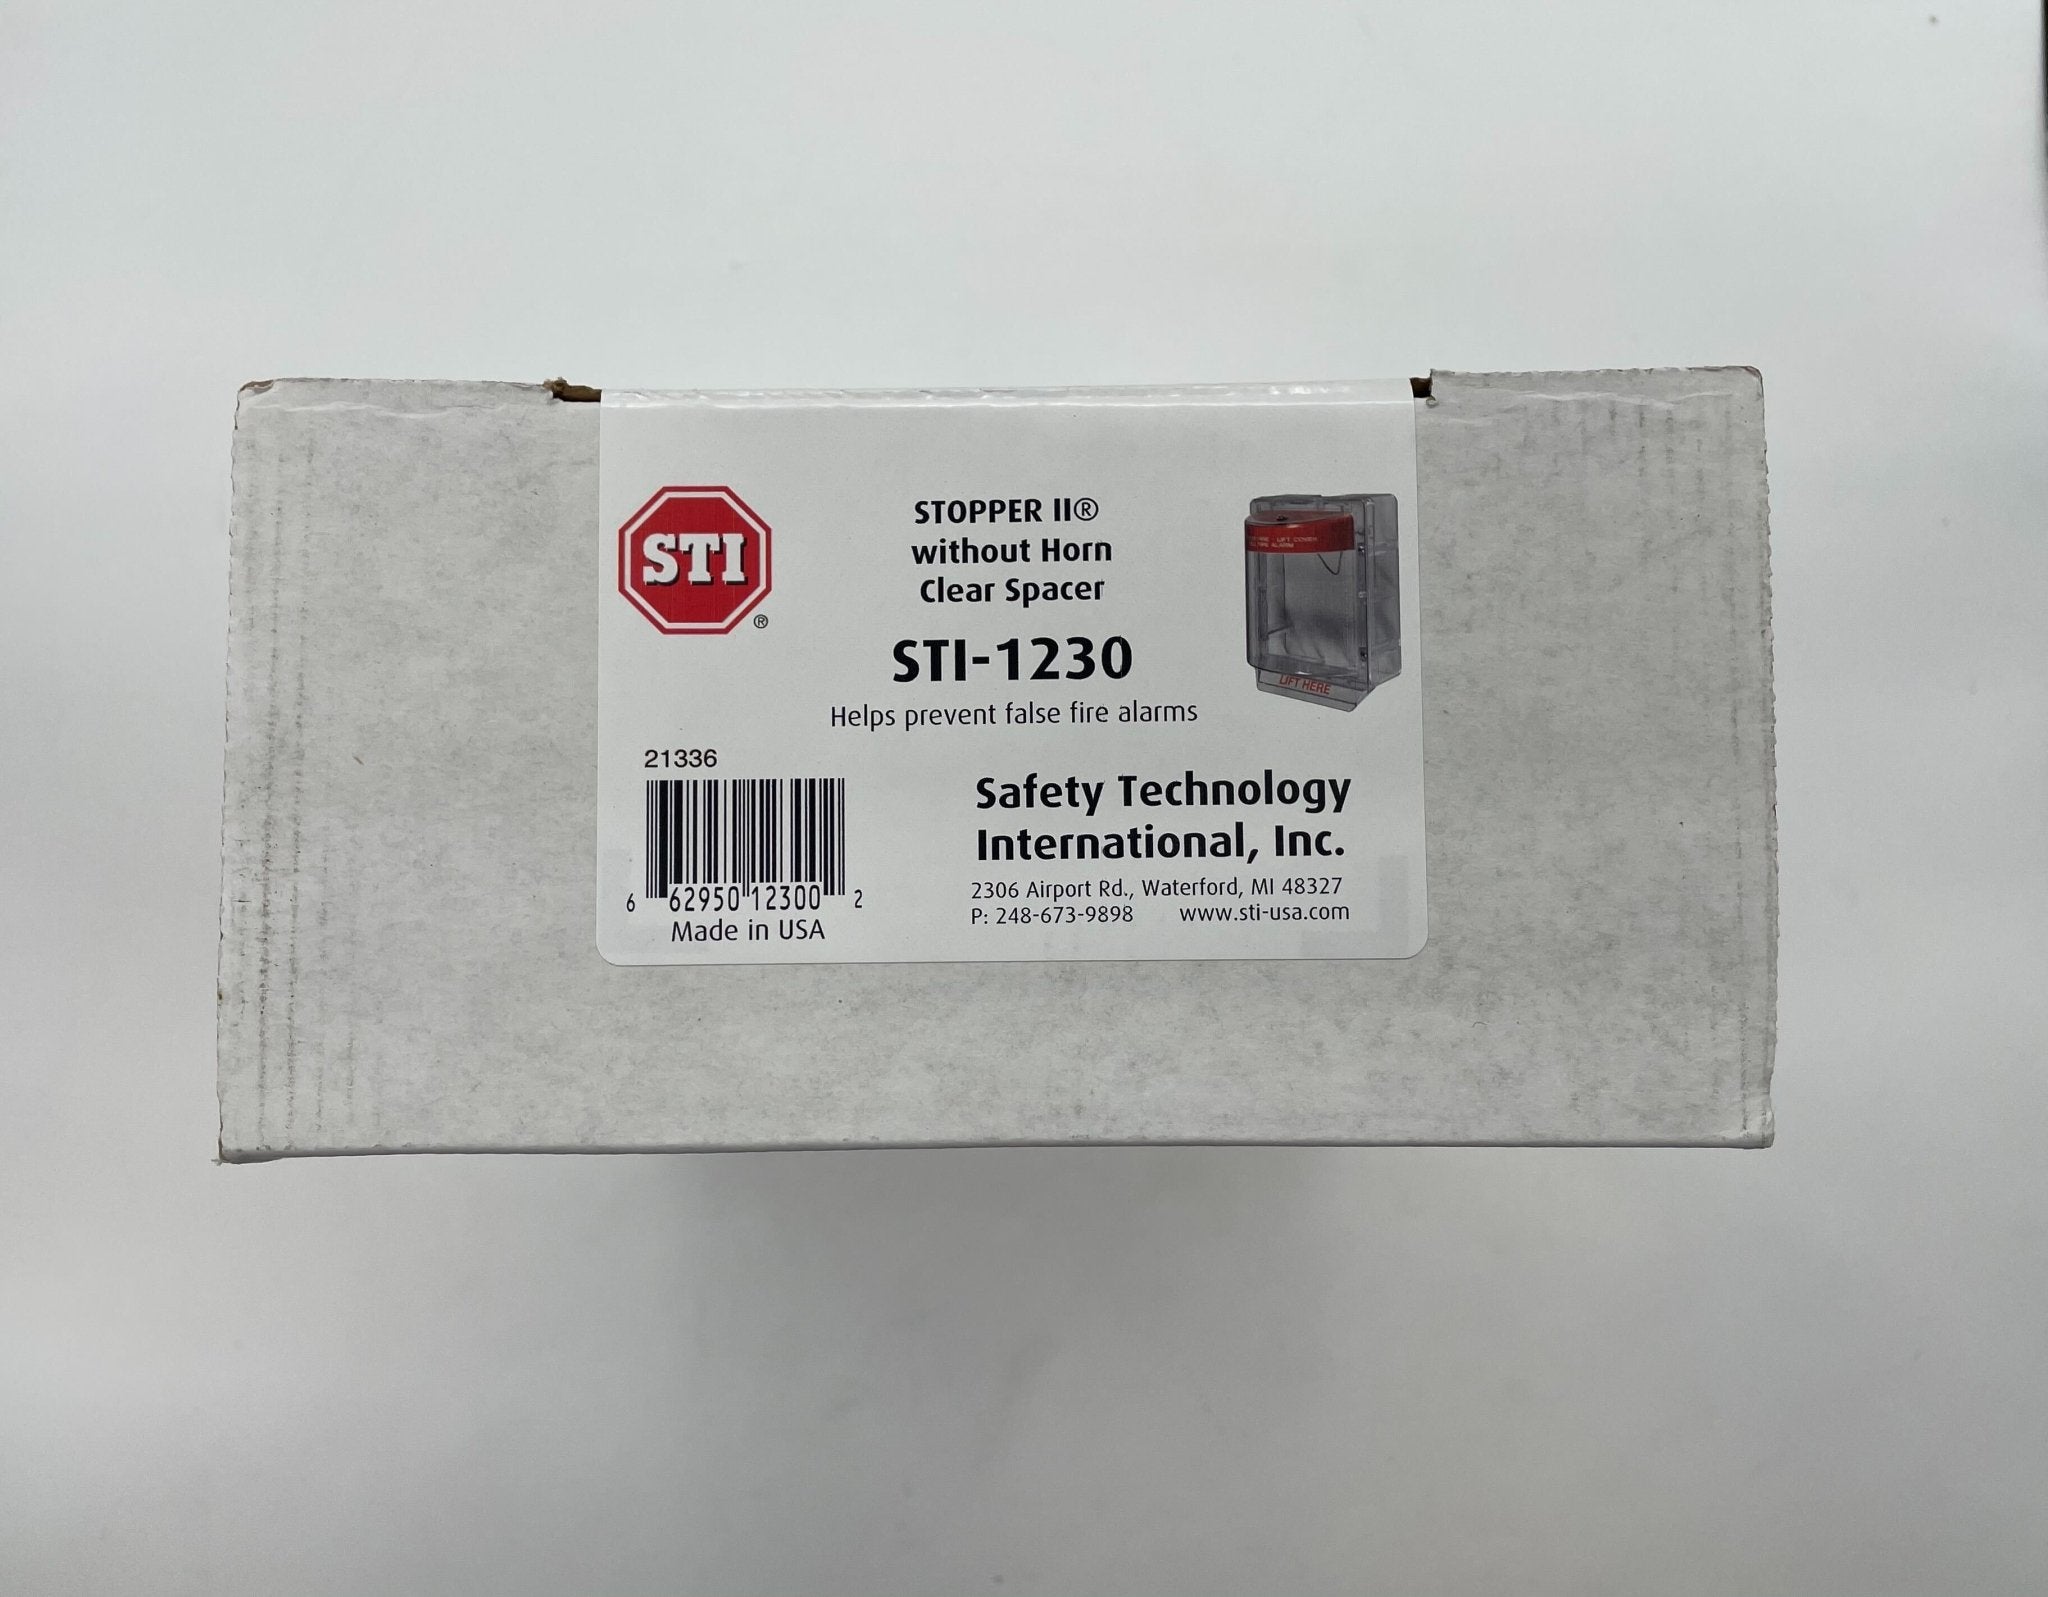 STI-1230 Ll Without Horn With Spacer - The Fire Alarm Supplier